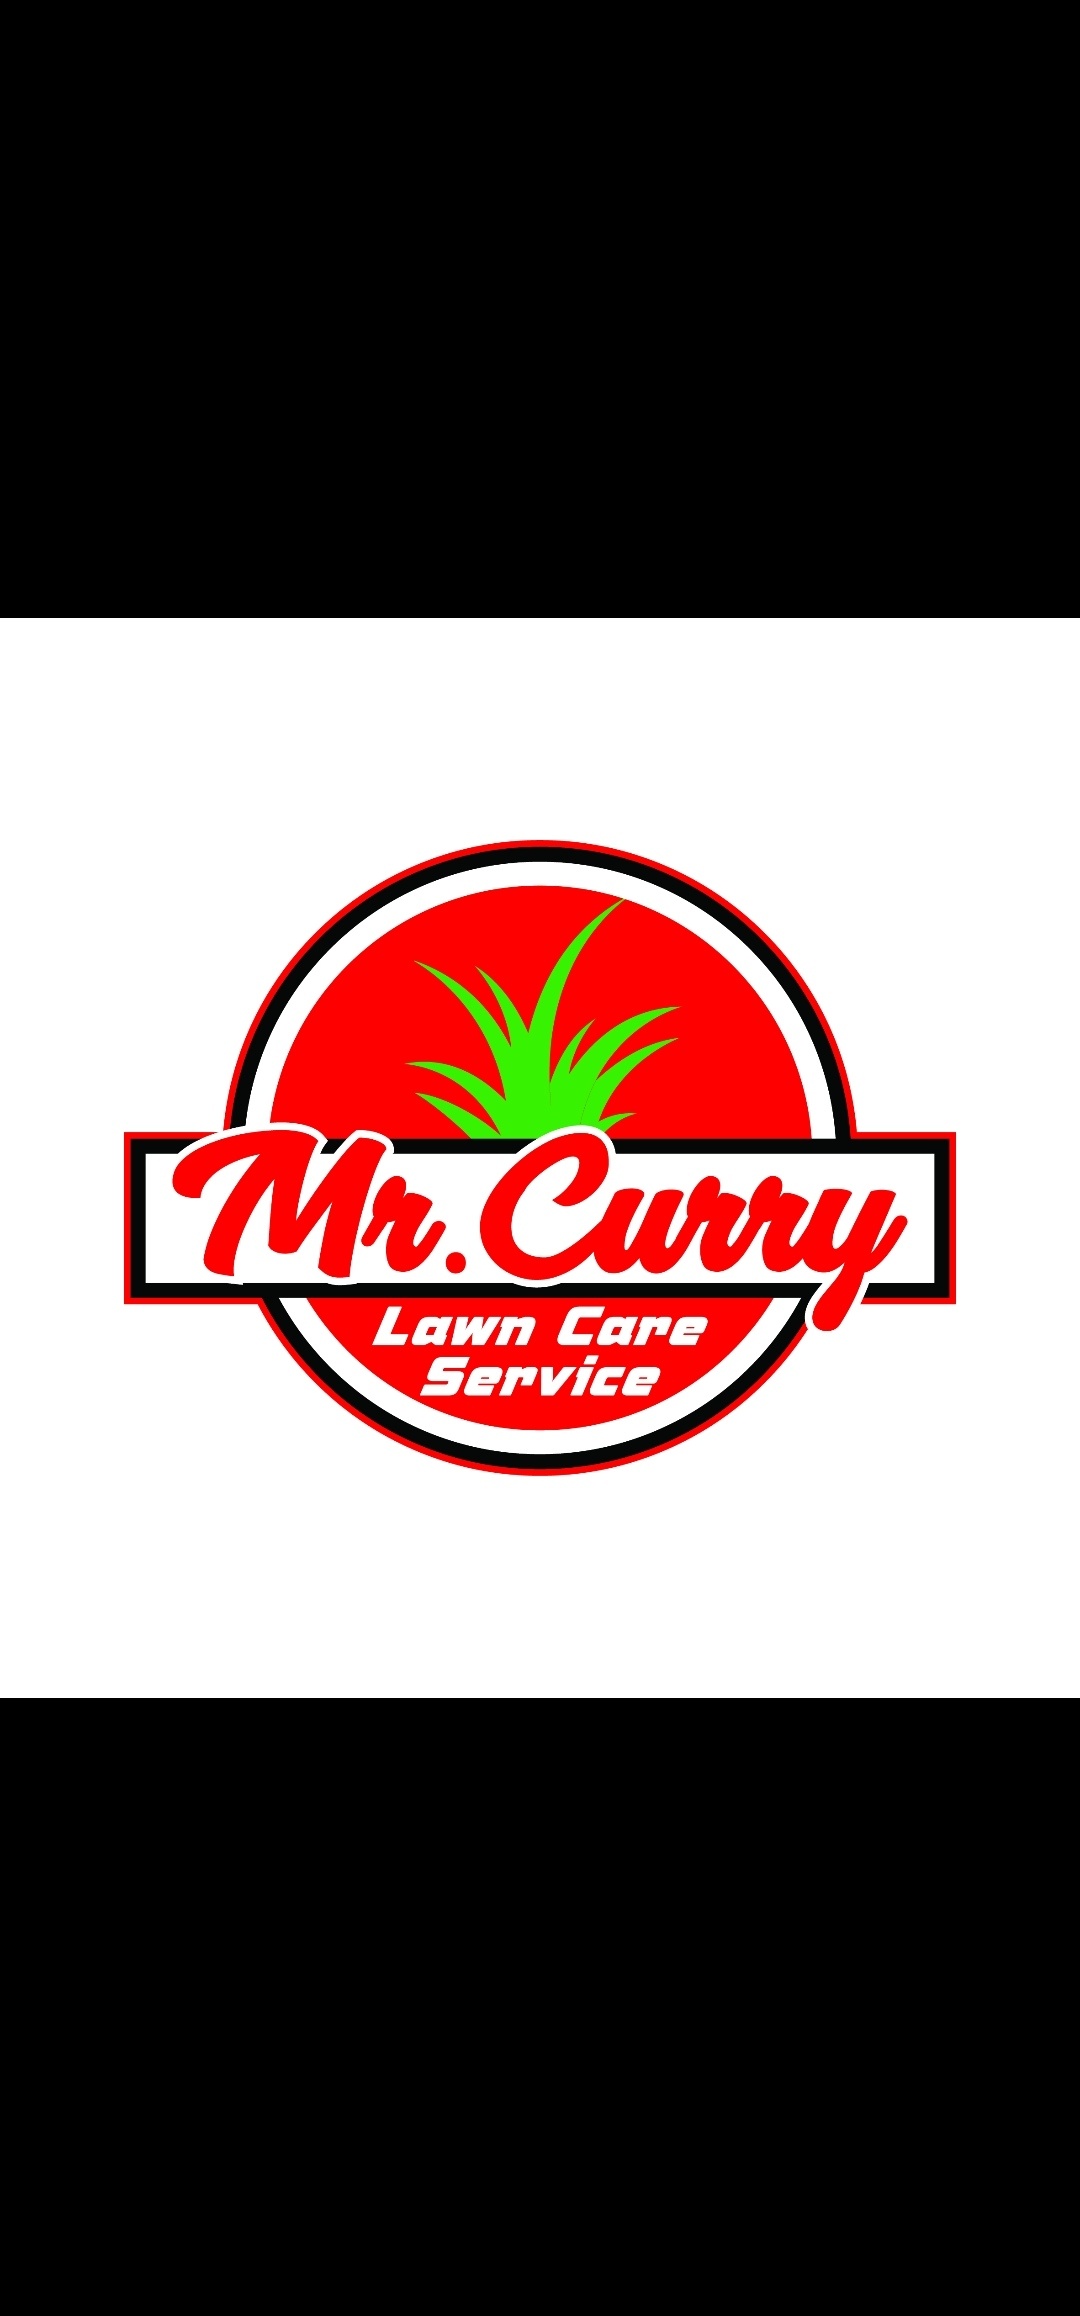 Mr. Curry's Lawn Services Logo